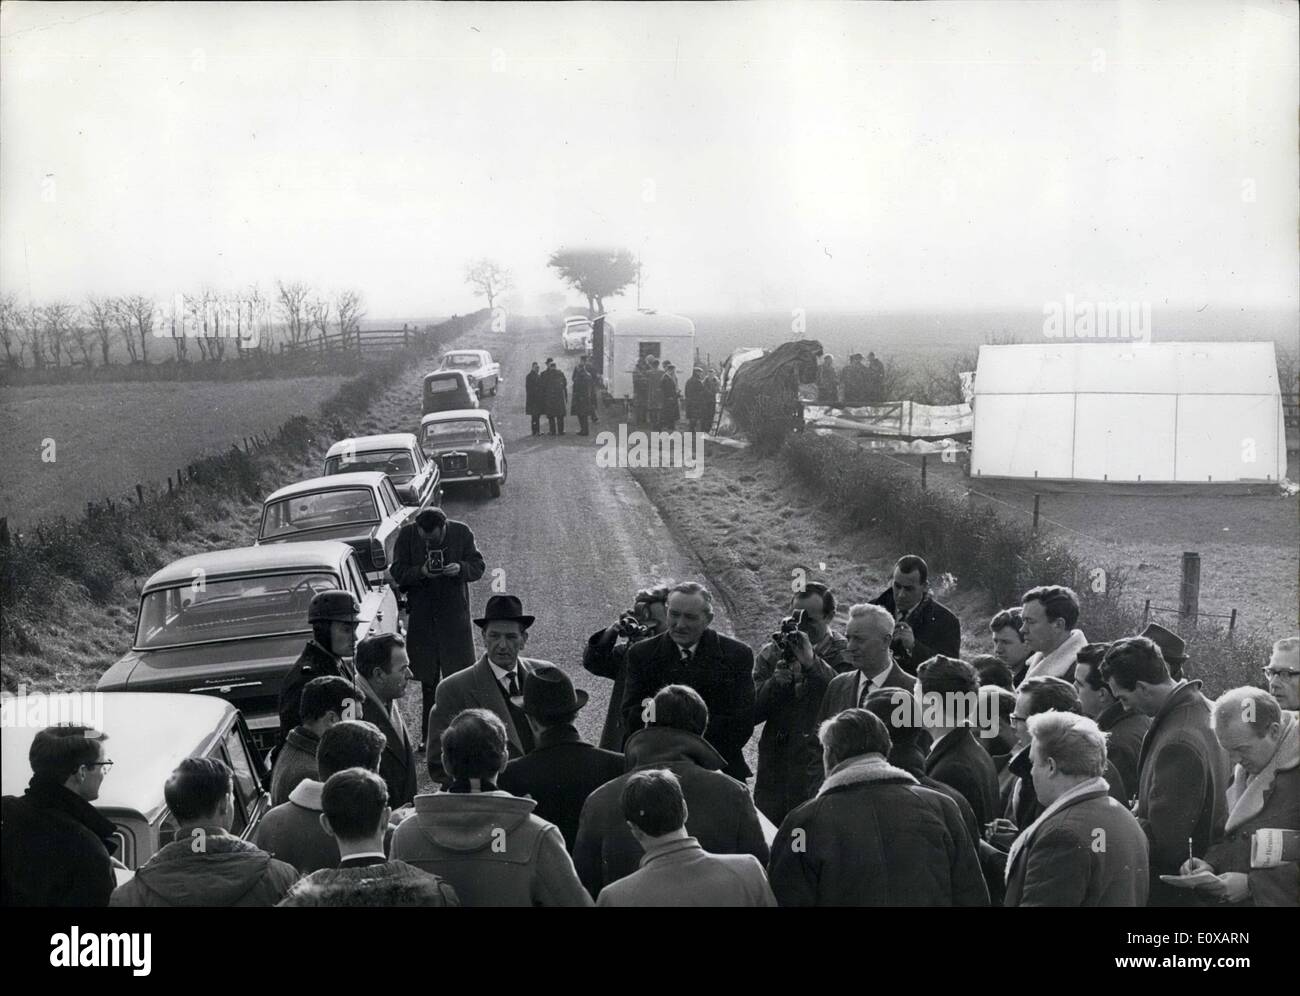 Jan. 01, 1966 - POLICE WARN PARENTS IN DOUBLE MURDER AREA Police hunting the murderer of two young girls last night warned parents not allow children out alone. In a message to families living near the A34 Birmingham-Stafford road, Mr. Tom Lookley, Assistant Chief Constable of Staffordshire, said: ''A dangerous, ruthless killer is at large. Until he is found no child is safe.'' The second murdered child is 6-year old Margaret Reynolds, who has been missing for four months Stock Photo